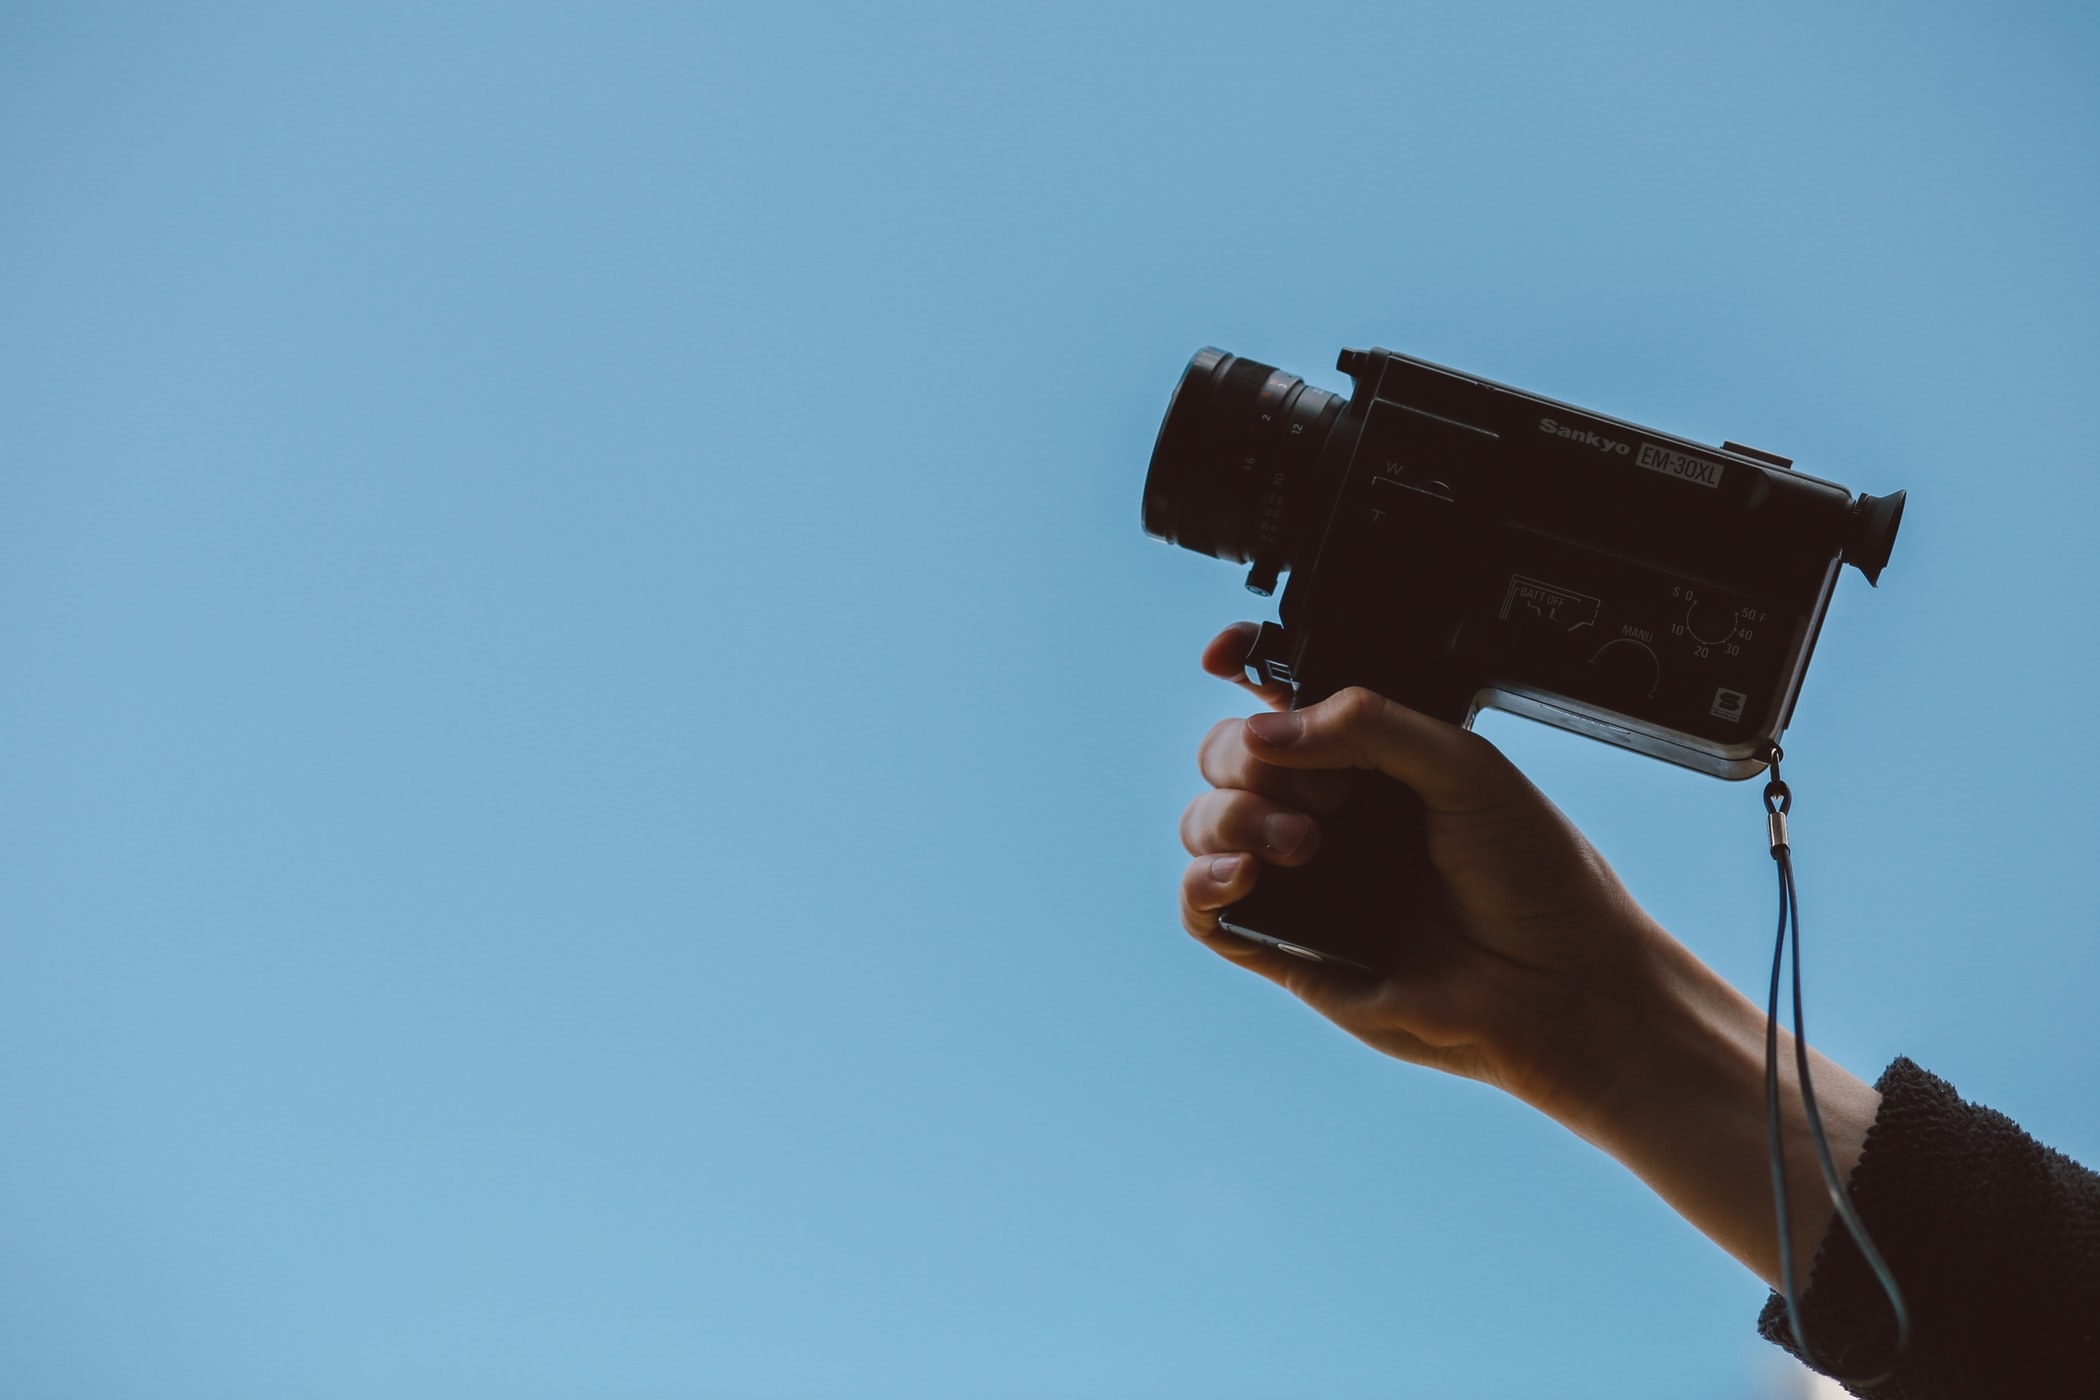 10 Best Budget Cameras For Filmmaking in 2019 - An image of someone holding a vintage camcorder